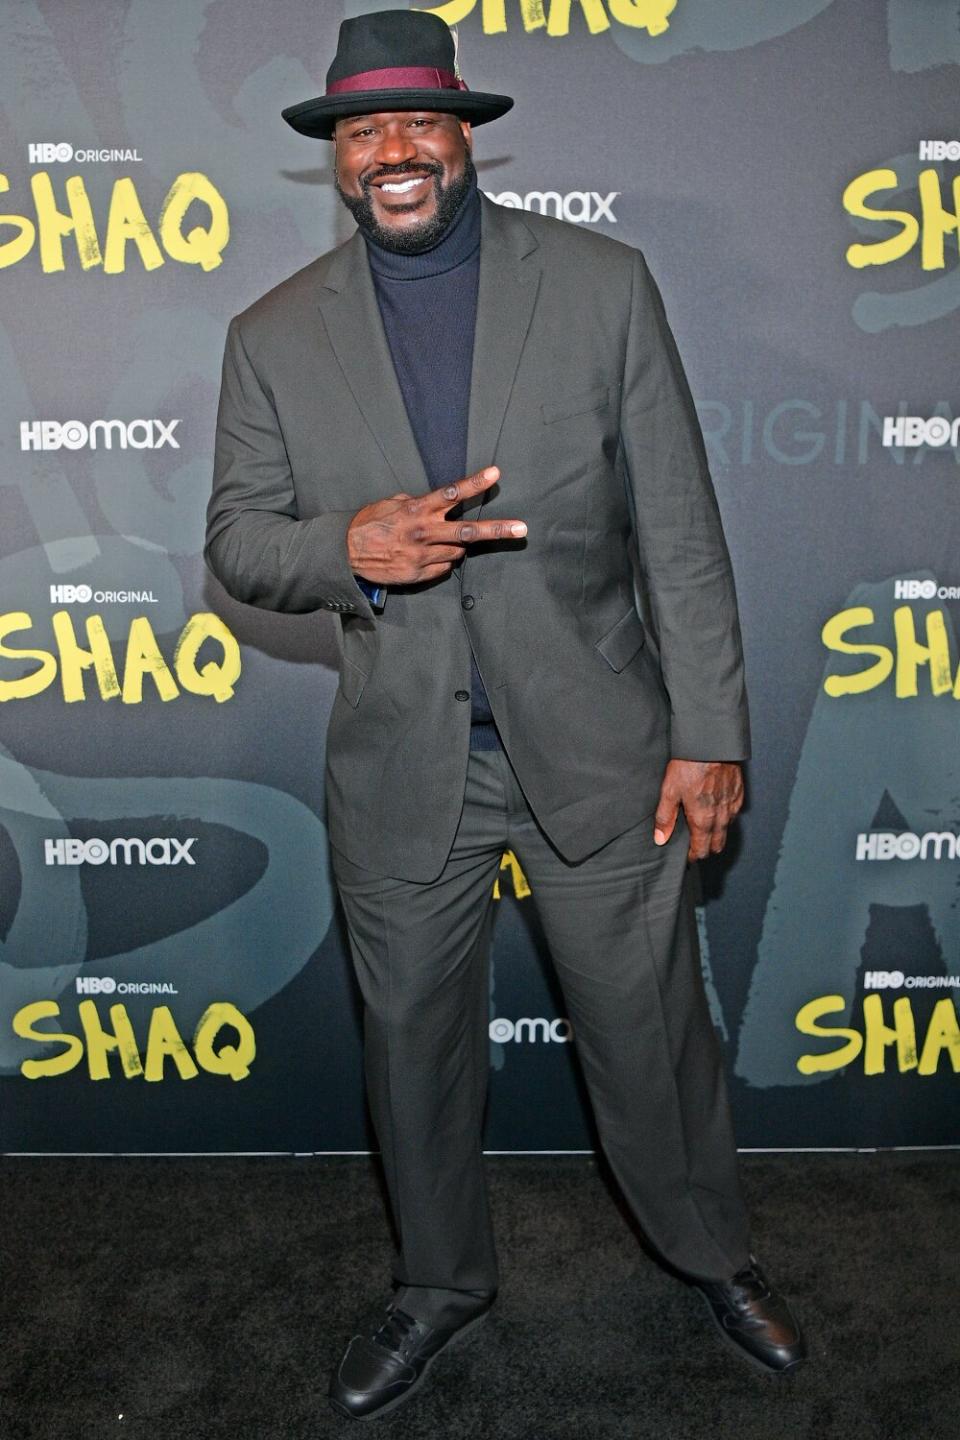 Shaquille O'Neal attends HBO Premiere For Four-Part Documentary "SHAQ"  at Illuminarium on November 14, 2022 in Atlanta, Georgia. (Photo by Prince Williams/Wireimage)